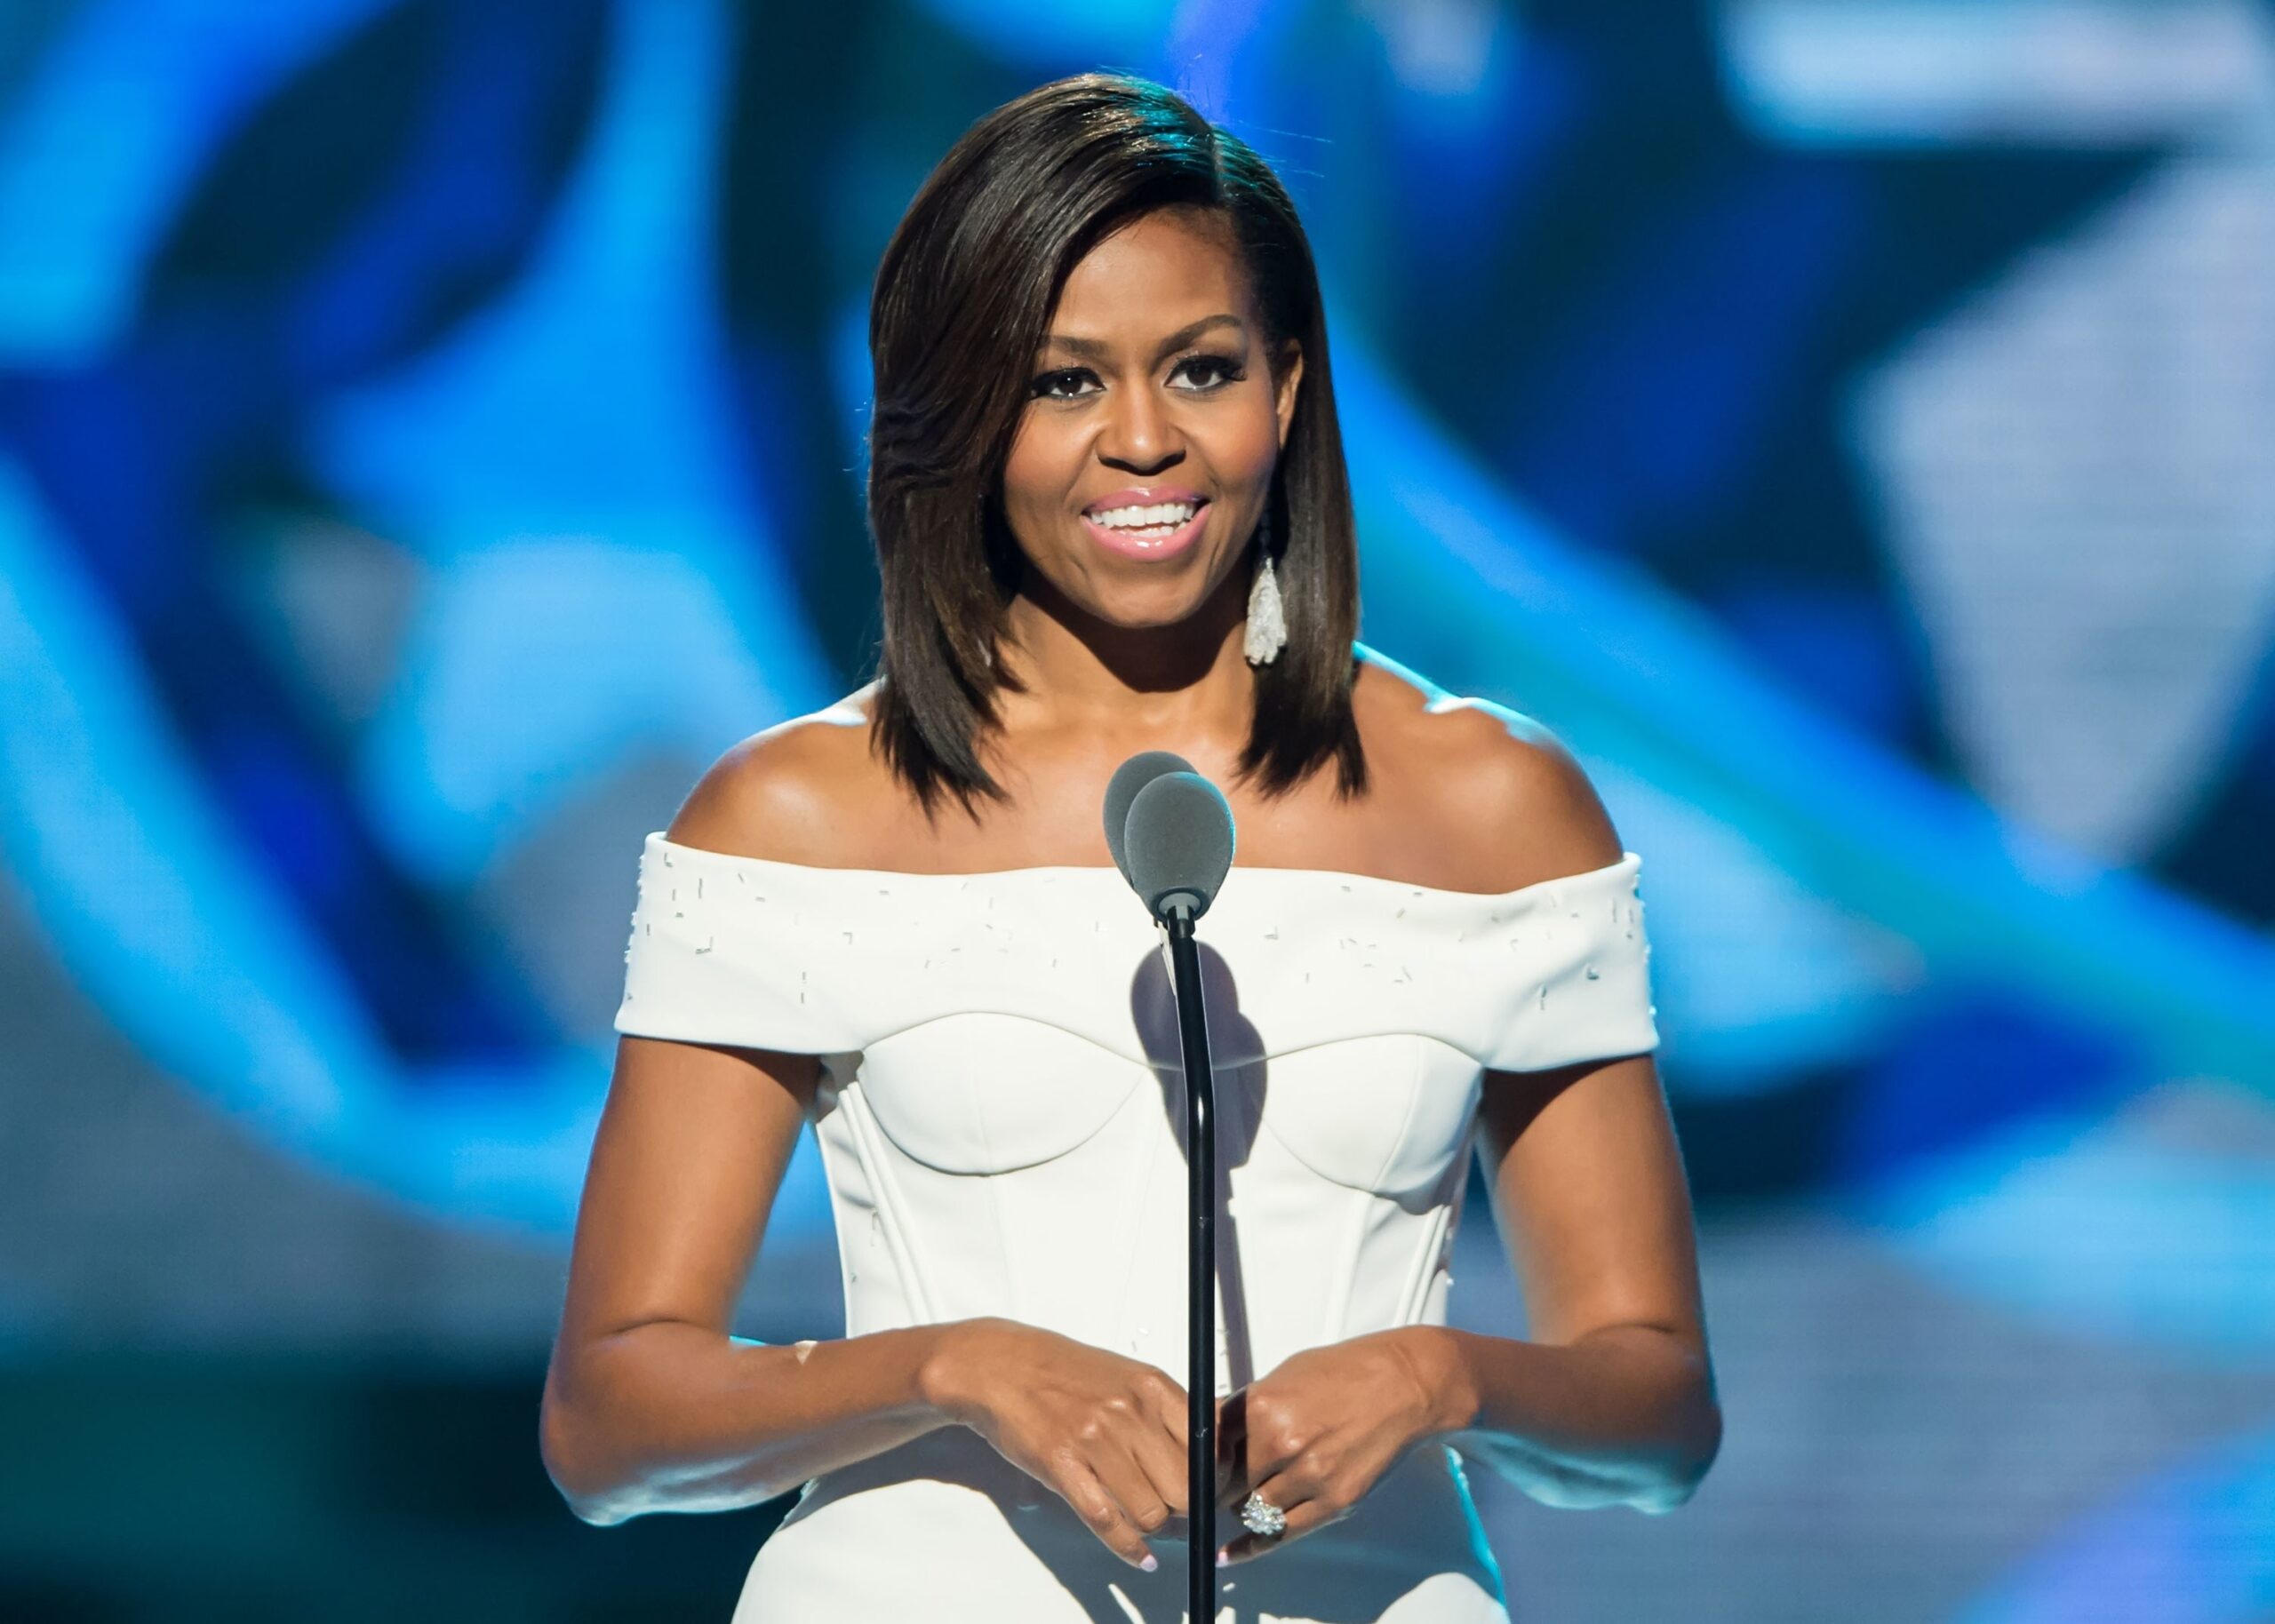 Michelle Obama Arena Pile Top 10 Fashion Icons of All Time In The World